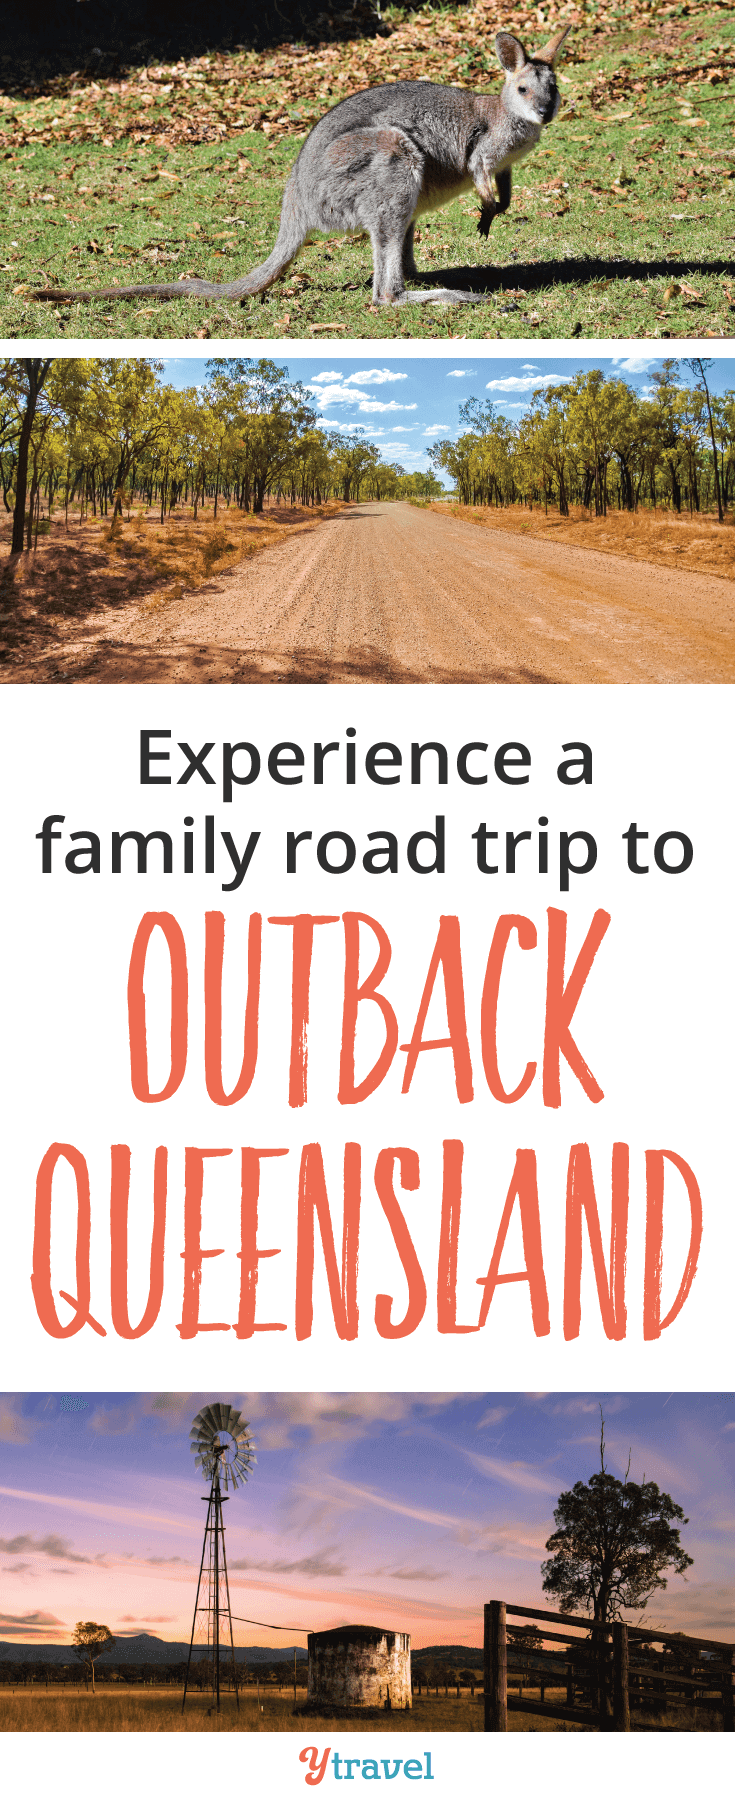 Experience a family road trip to Outback Queensland and check out why we love it and think it's an enriching destination for families.